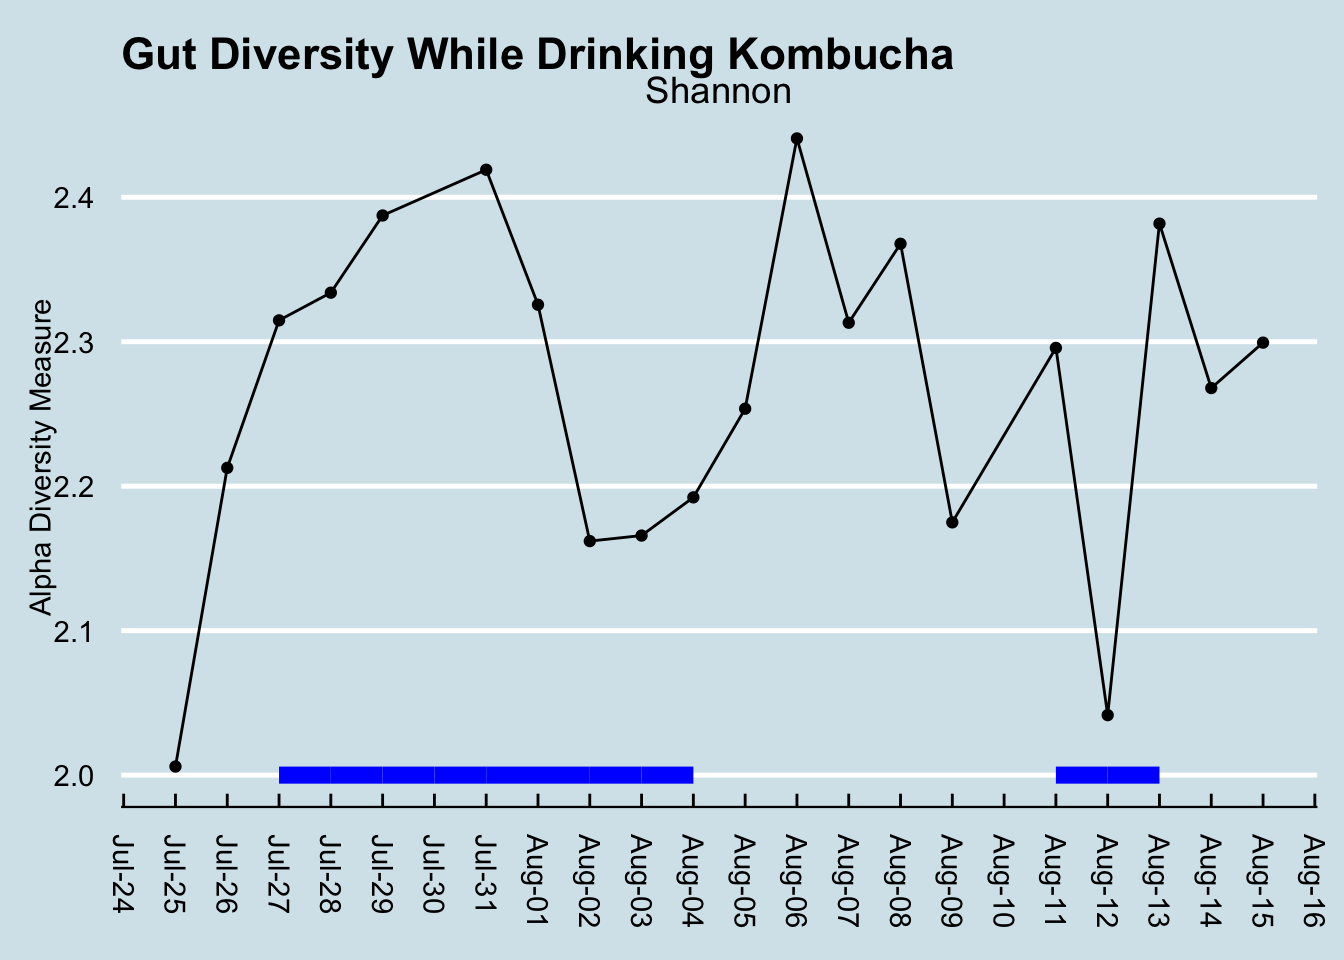 How my overall family-level diversity changes while drinking kombucha. I drank 6 full servings on each of the days marked with the blue line.